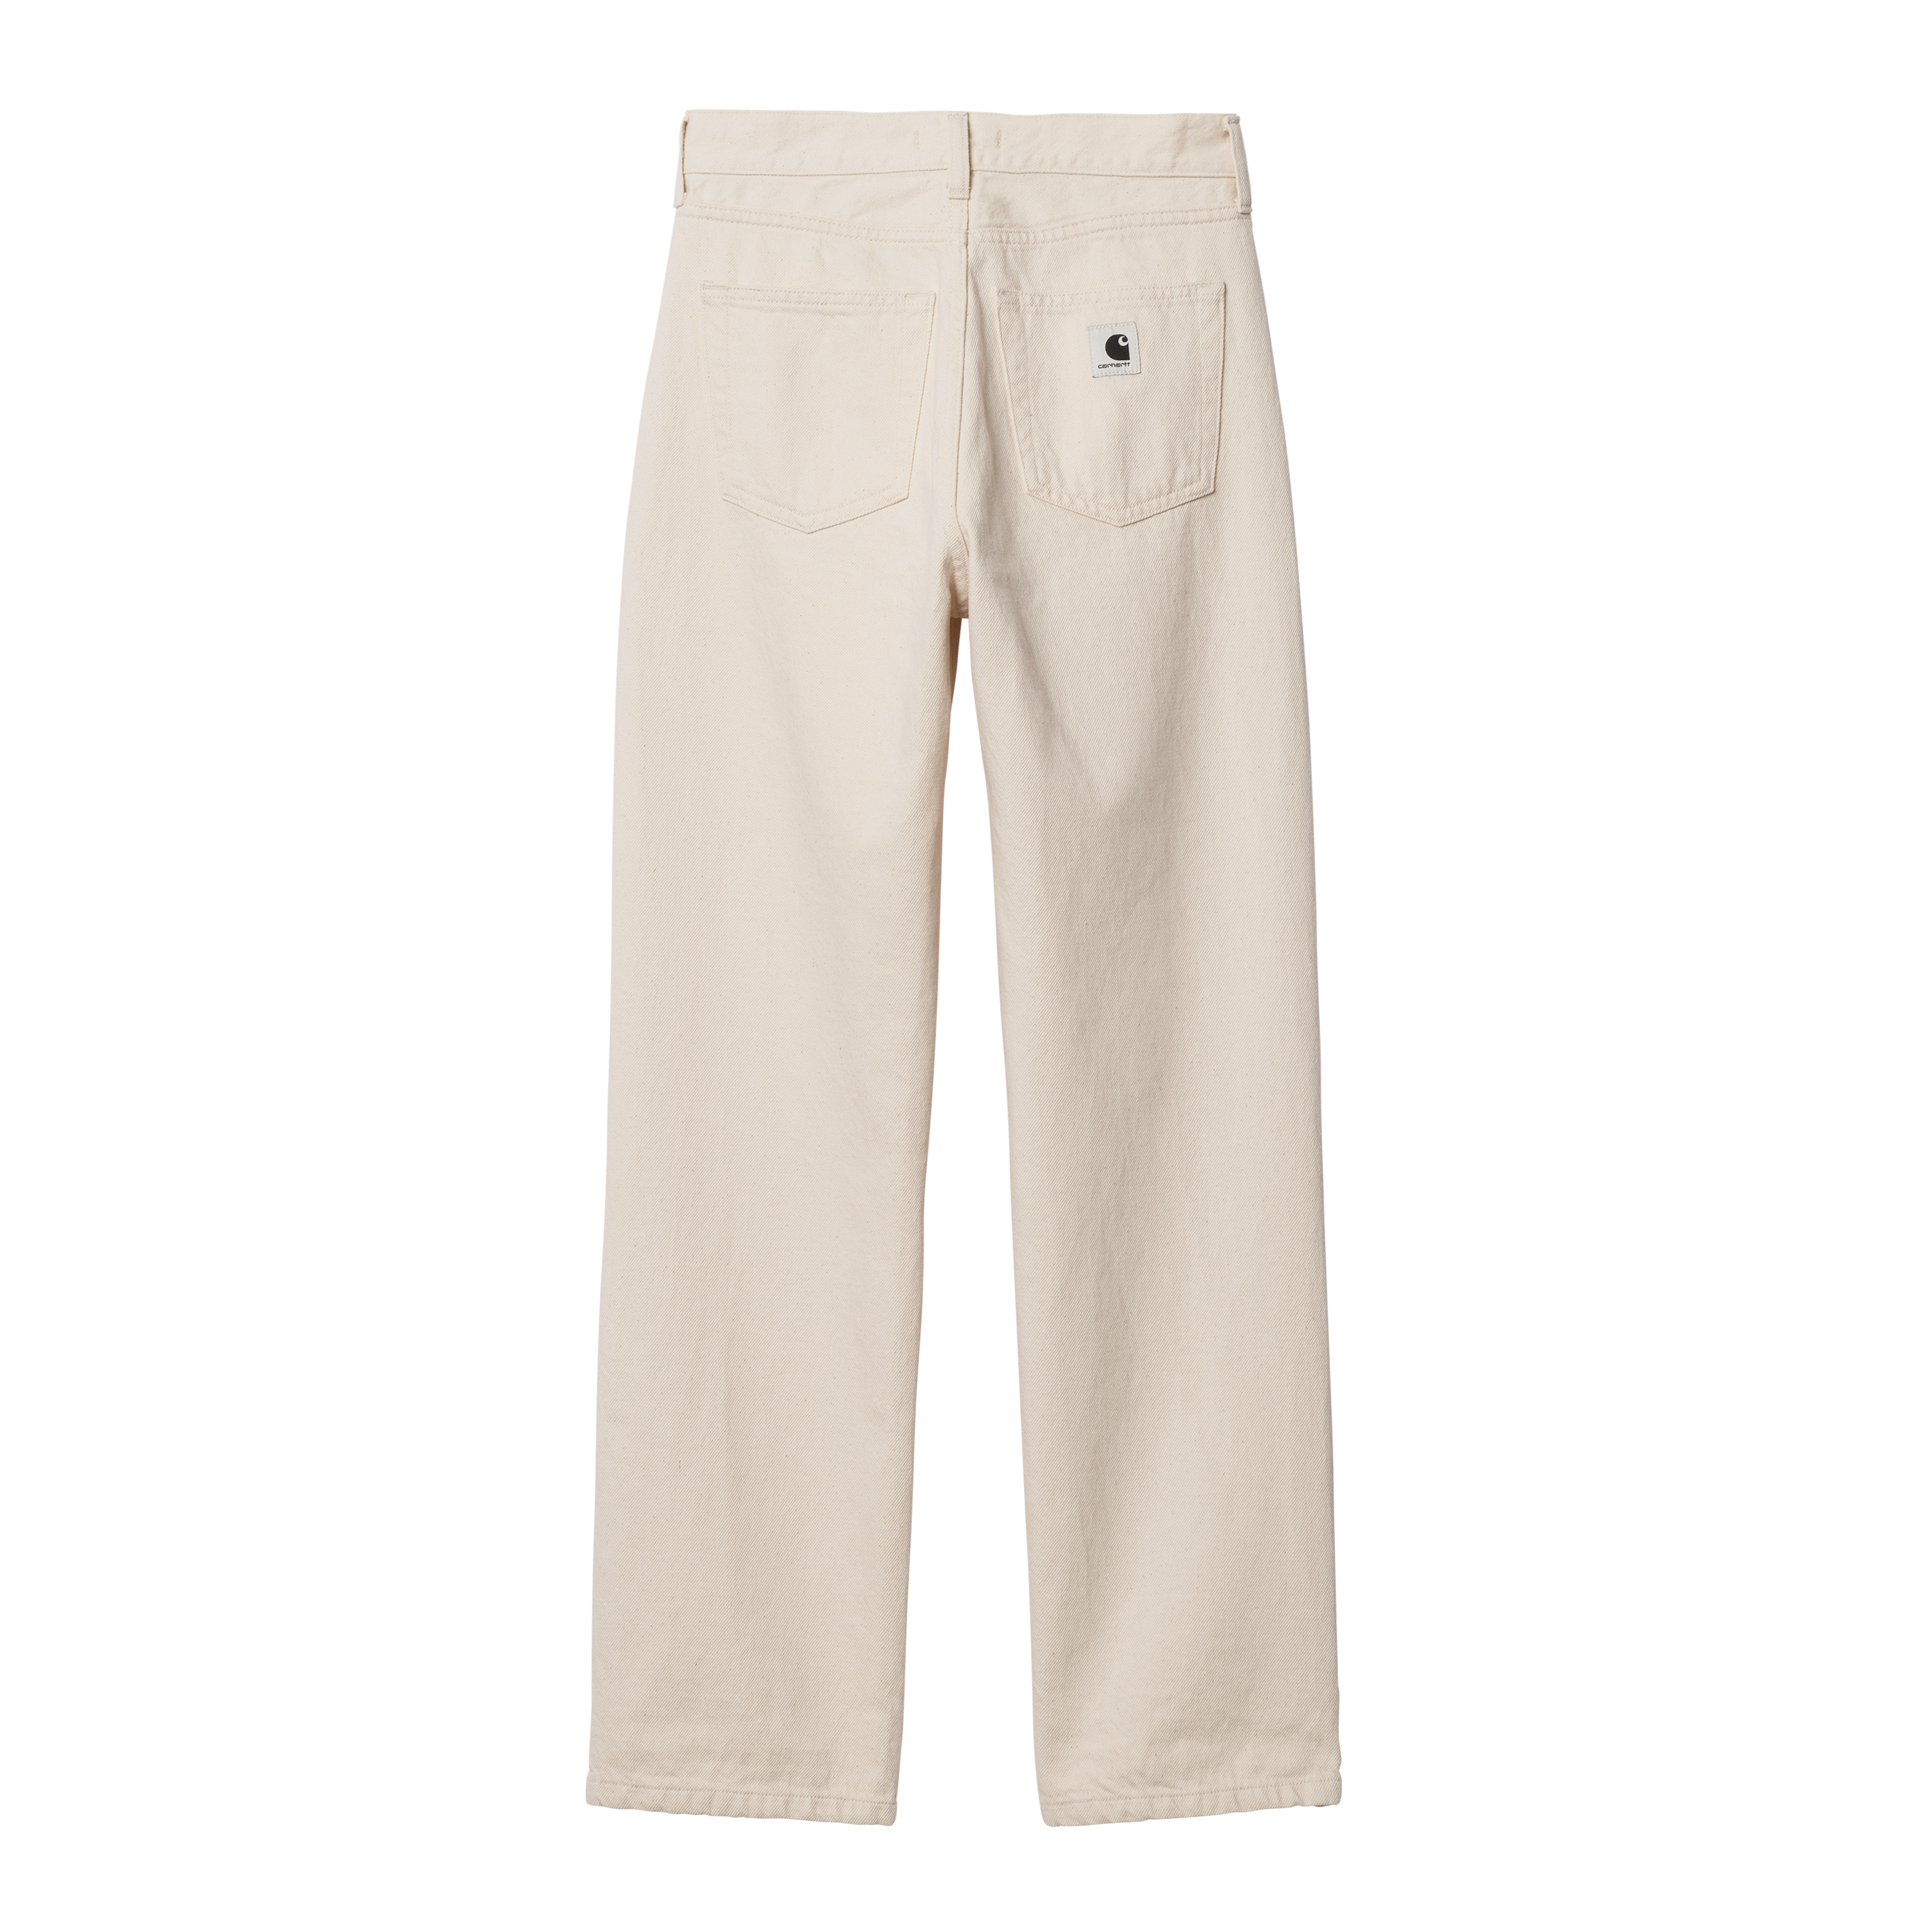 https://cdn.media.amplience.net/i/carhartt_wip/I031559_05_06-ST-01/w-noxon-pant-natural-stone-washed-1086.png?$pdp_01_mobile$